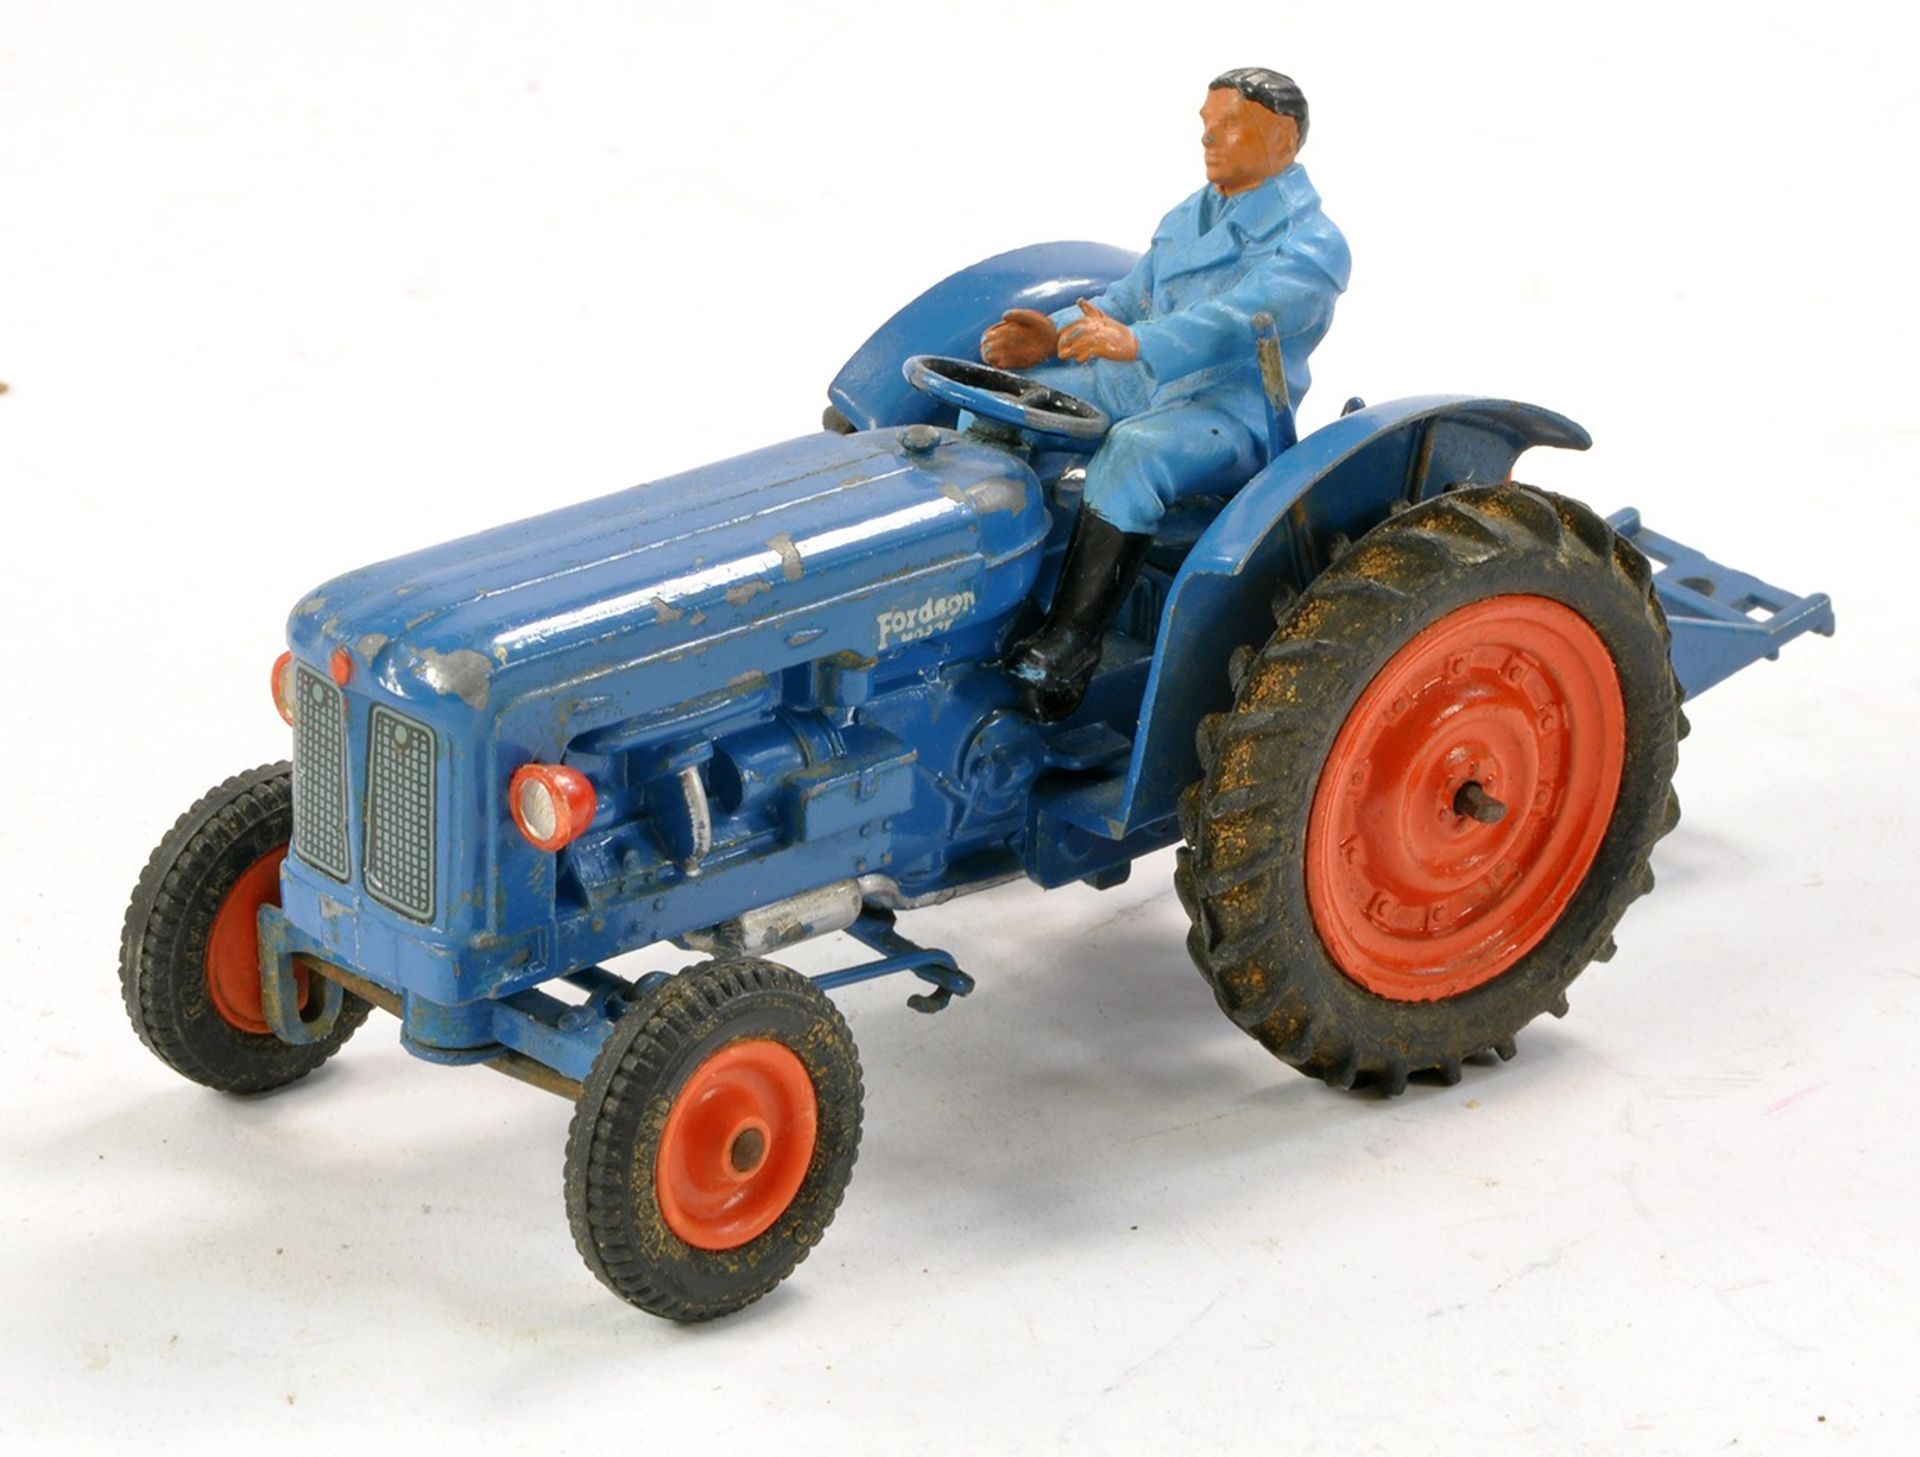 Britains No. 172F Fordson Power Major Tractor. Original example is generally good with some minor